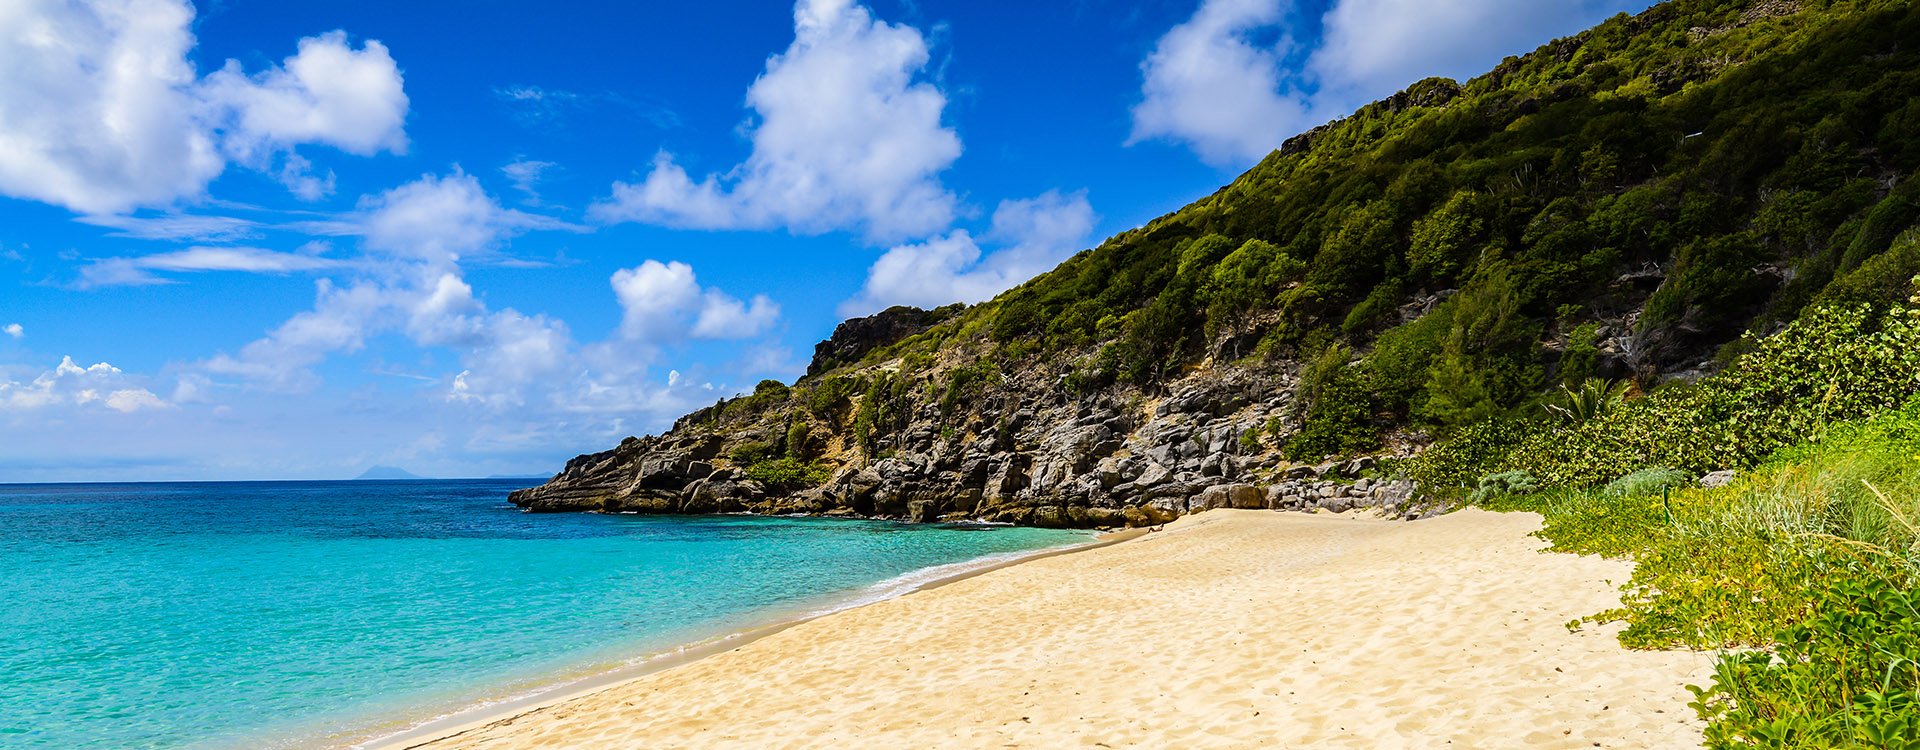 Remote and private Gouverneur Beach on the French Caribbean island of Saint Barthélemy